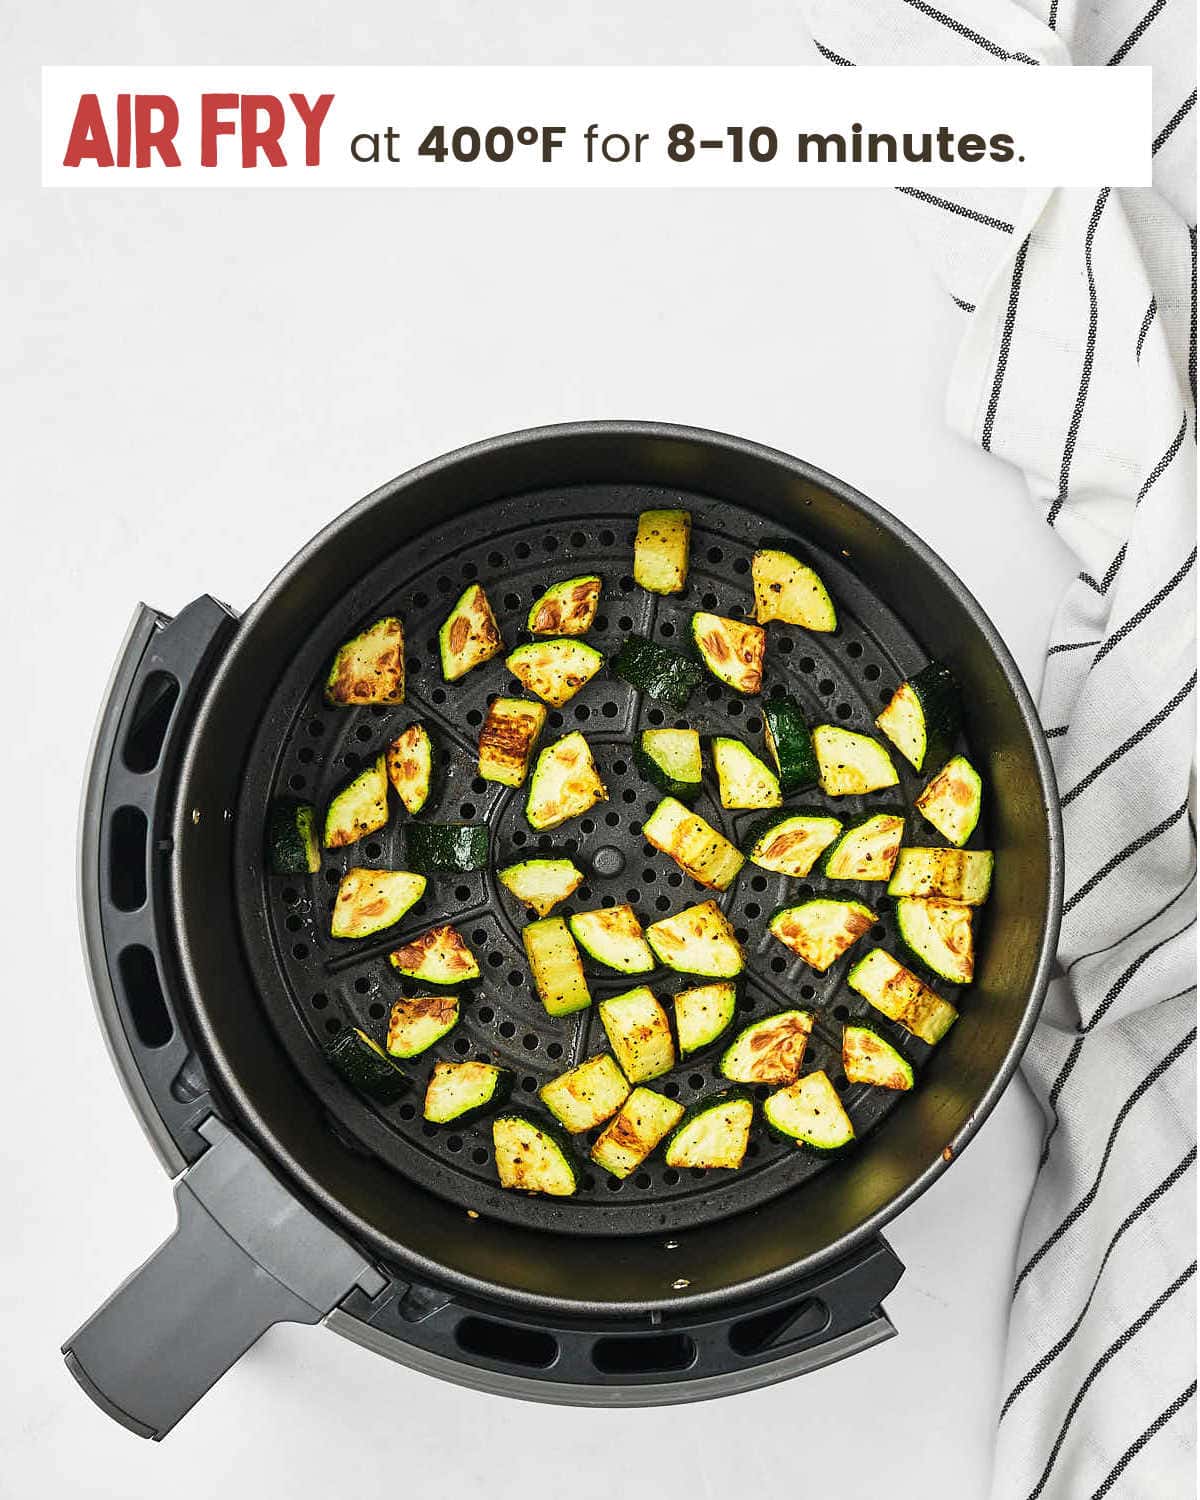 Cooked Air Fryer Zucchini in air fryer basket.